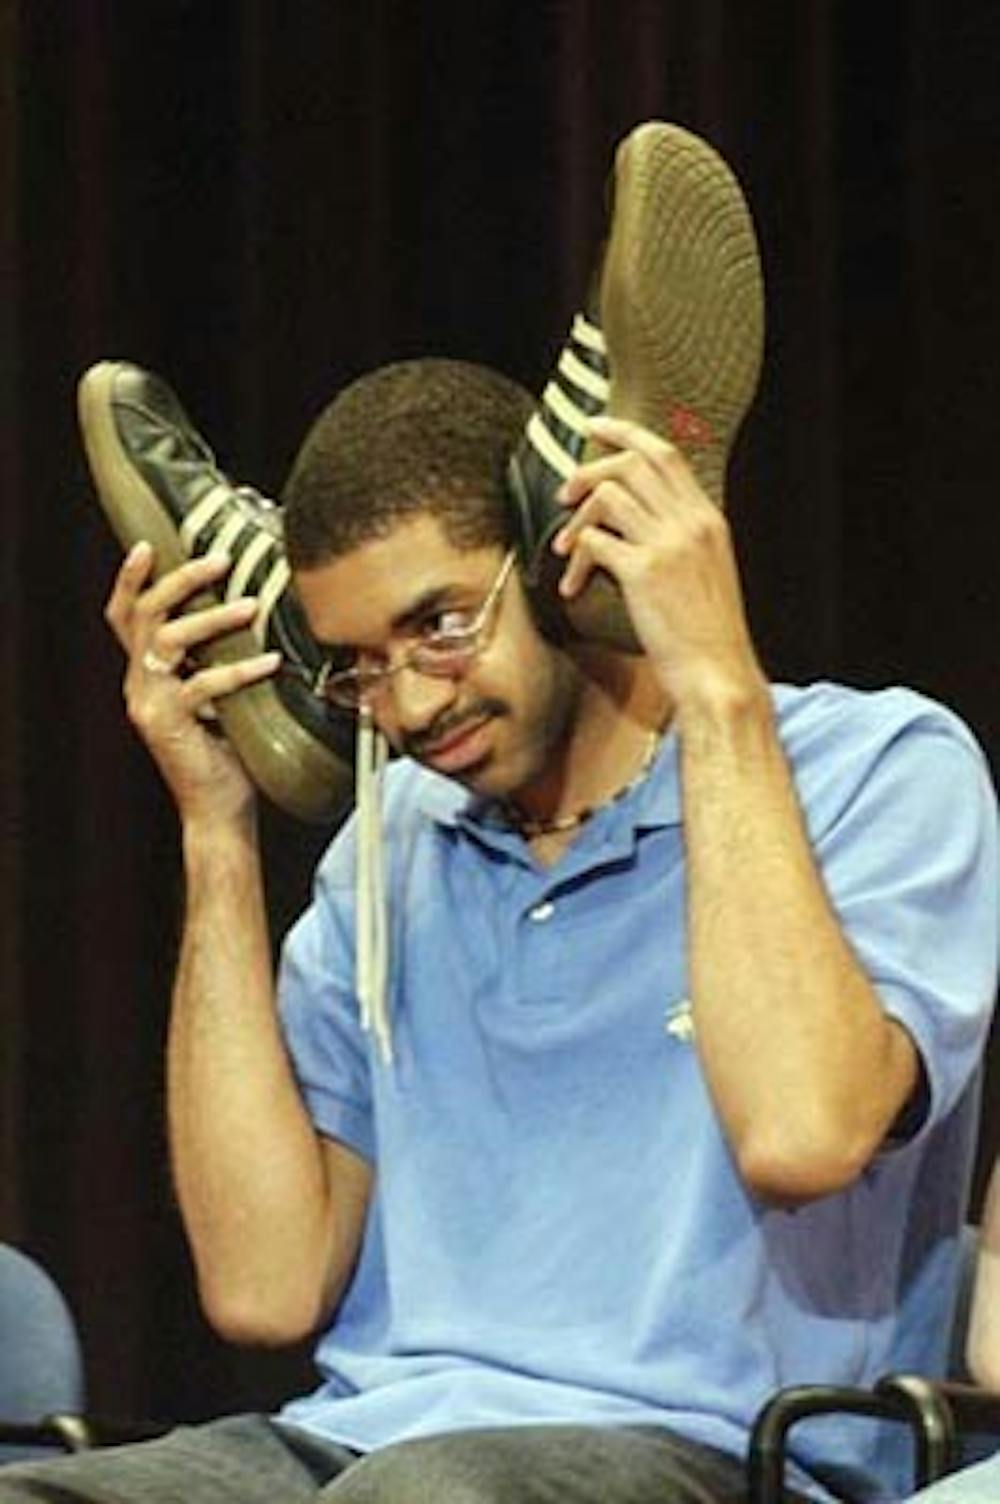 Student (name unknown) is told by hypnotist Tom Deluca that music is coming out of his shoes. The hypnotist's show was part of the No Place Like Penn weekend.